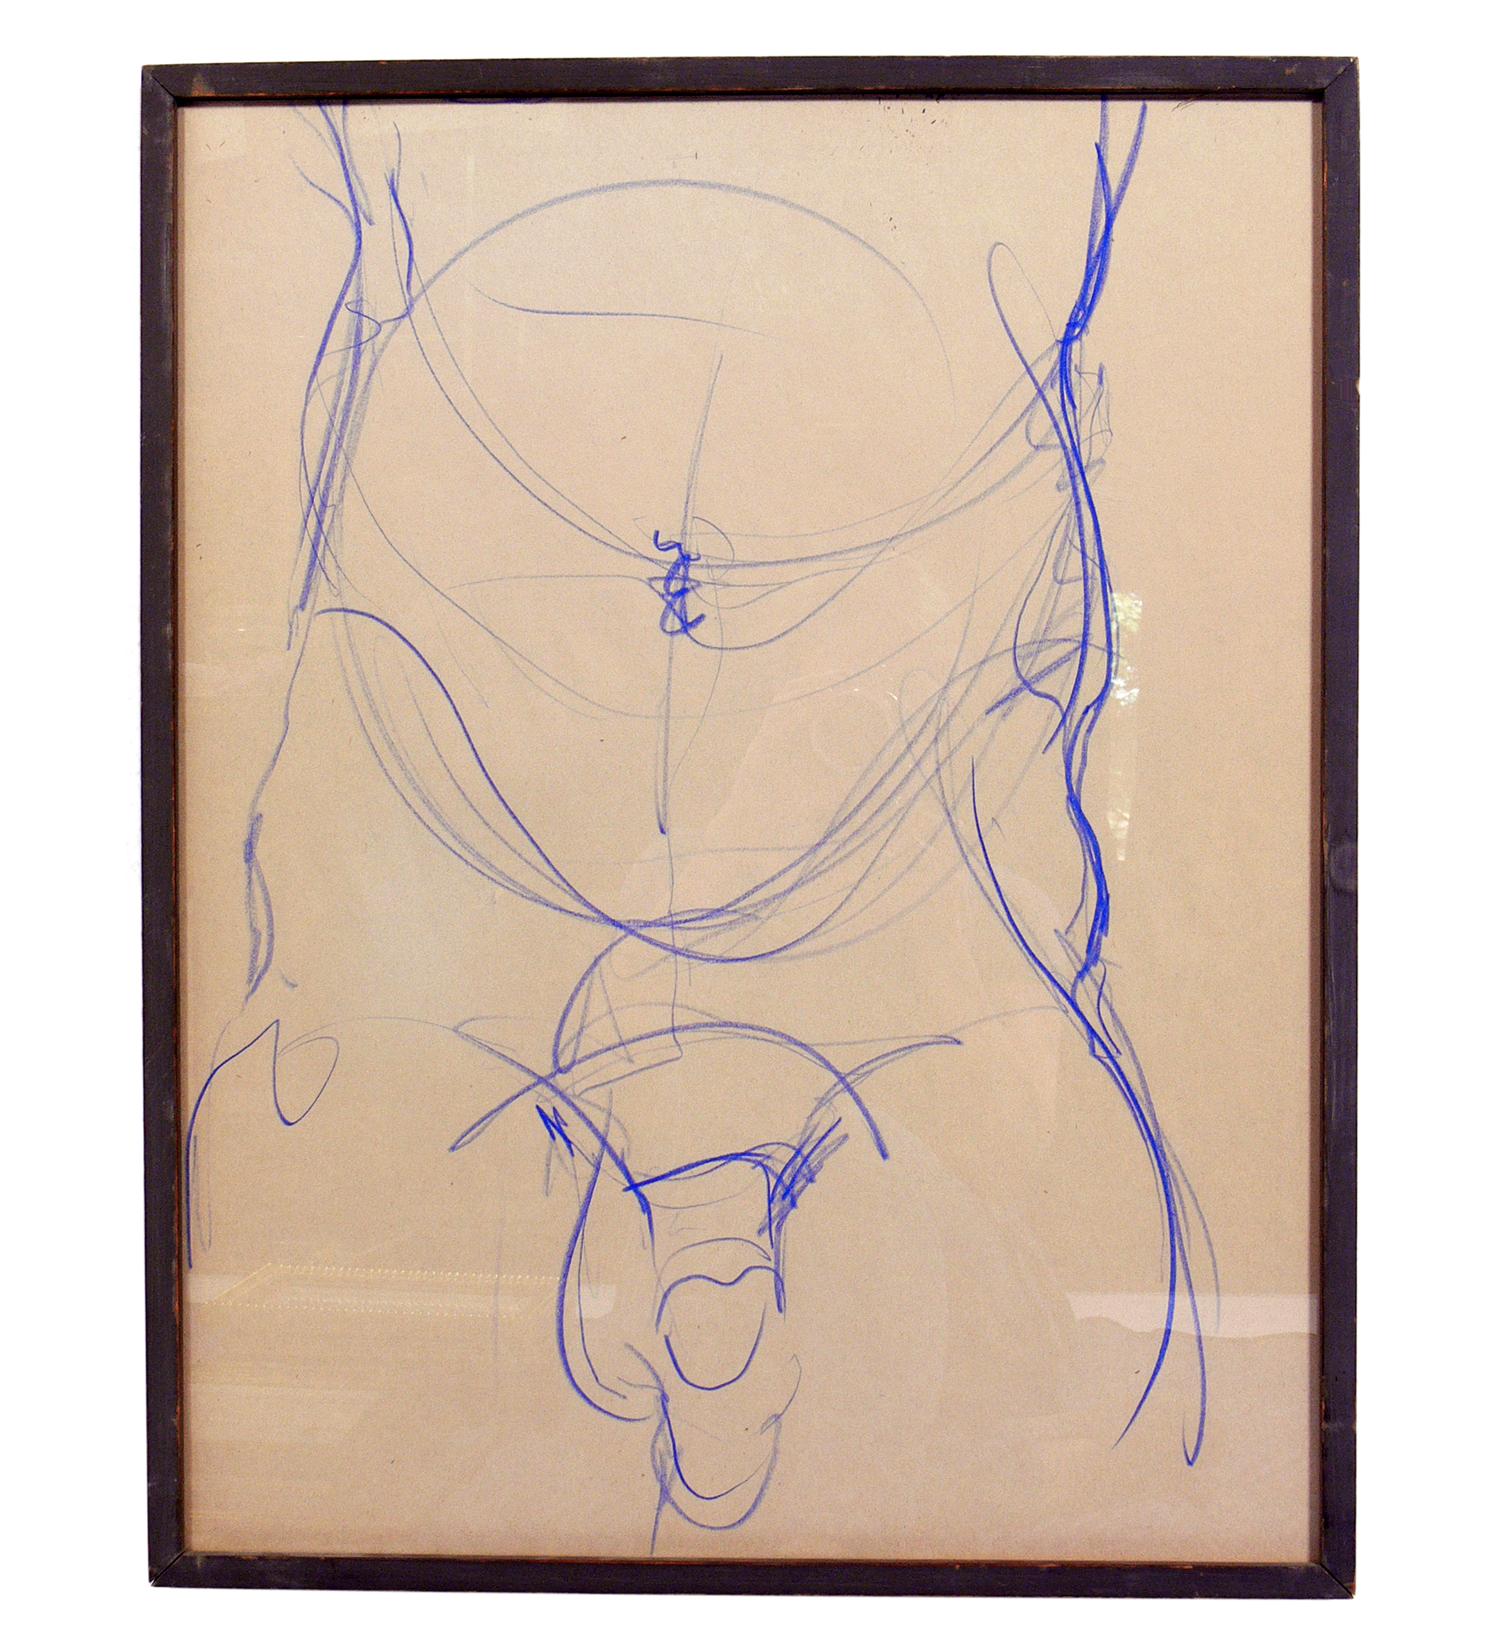 Male nude conte crayon drawings, artist unknown, American, circa 1960s.
They are priced at $450 each. updated